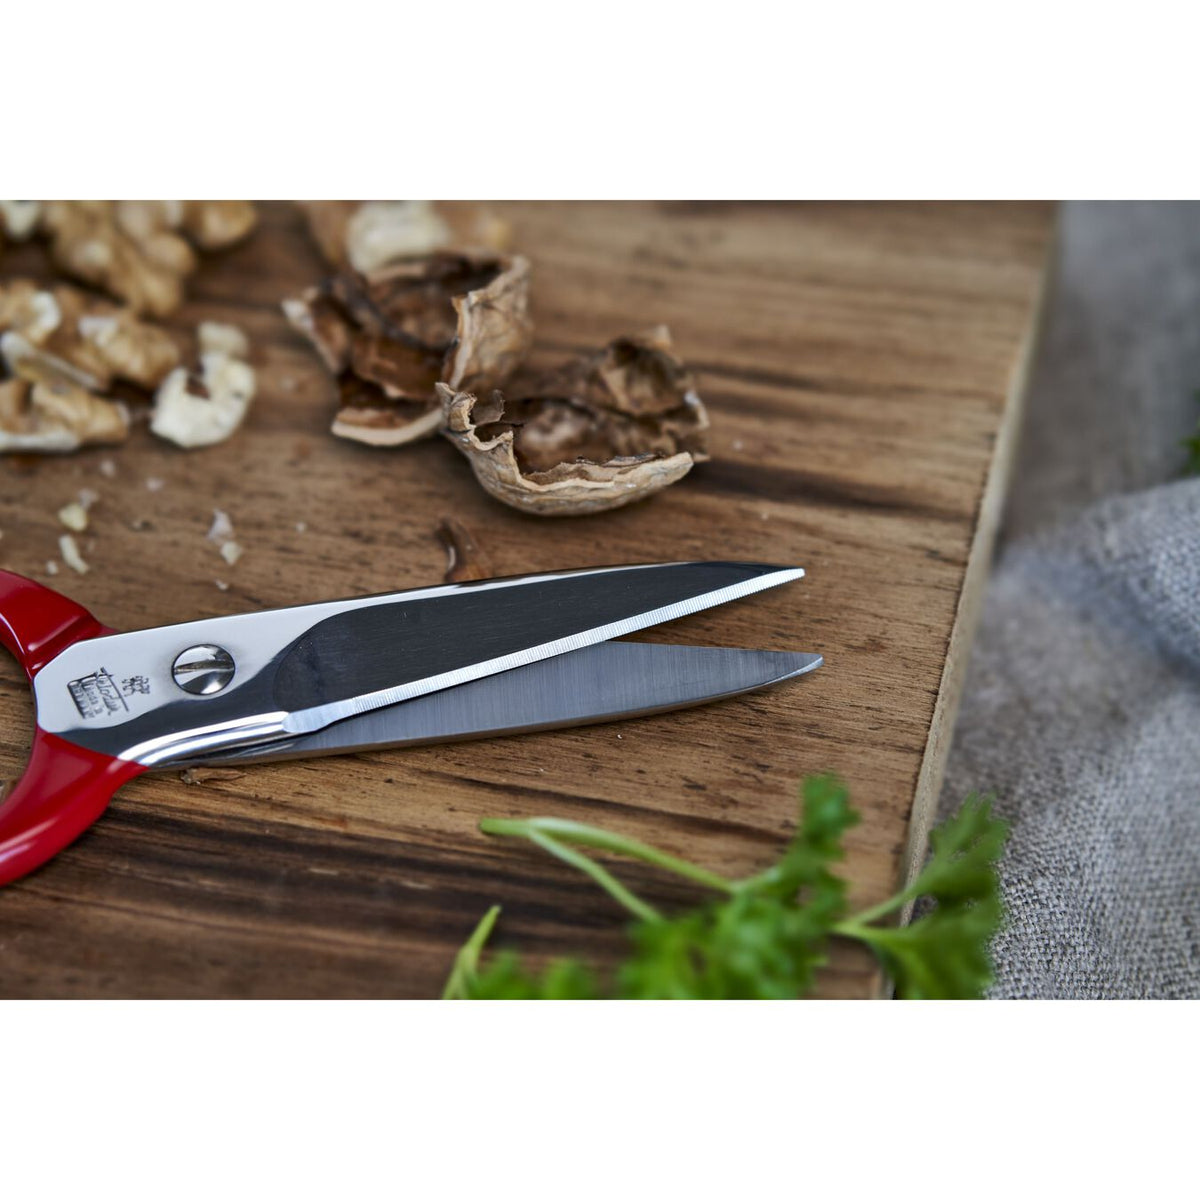 https://www.tanager.shop/wp-content/uploads/1691/20/every-client-is-treated-like-family-finding-the-zwilling-shears-scissors-multi-purpose-kitchen-shears-red-tanager-housewares-to-meet-the-needs-of-people-is-our-passion_2.jpg